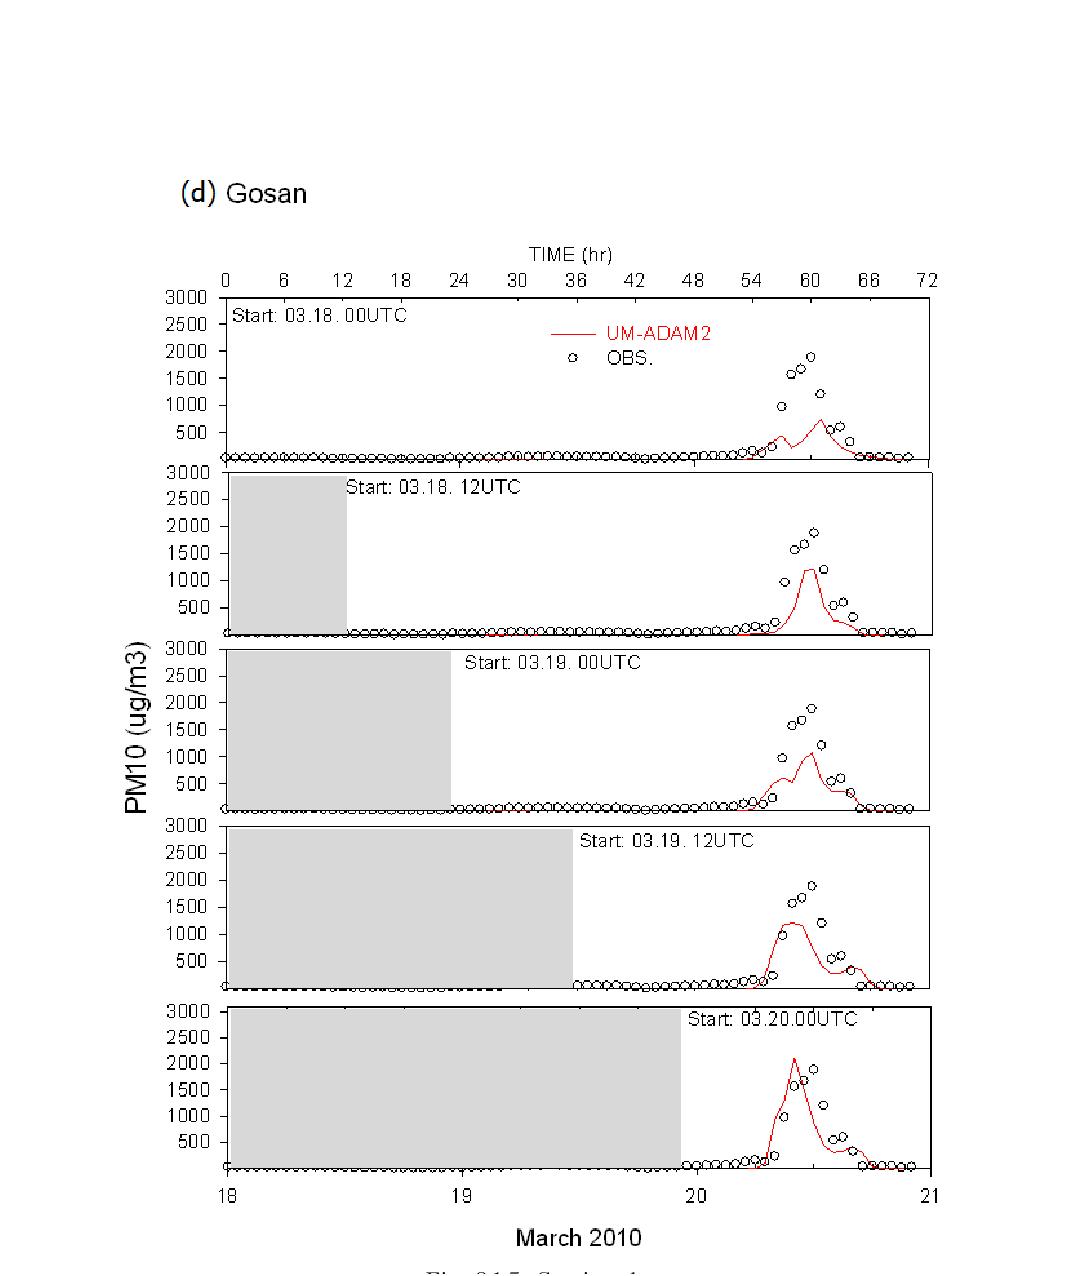 Time series of simulated and observed PM10 concentration at (a) Seoul, (b) Heuksando, (c) Jinju, and (d) Gosan, initialized from different simulation starting time.